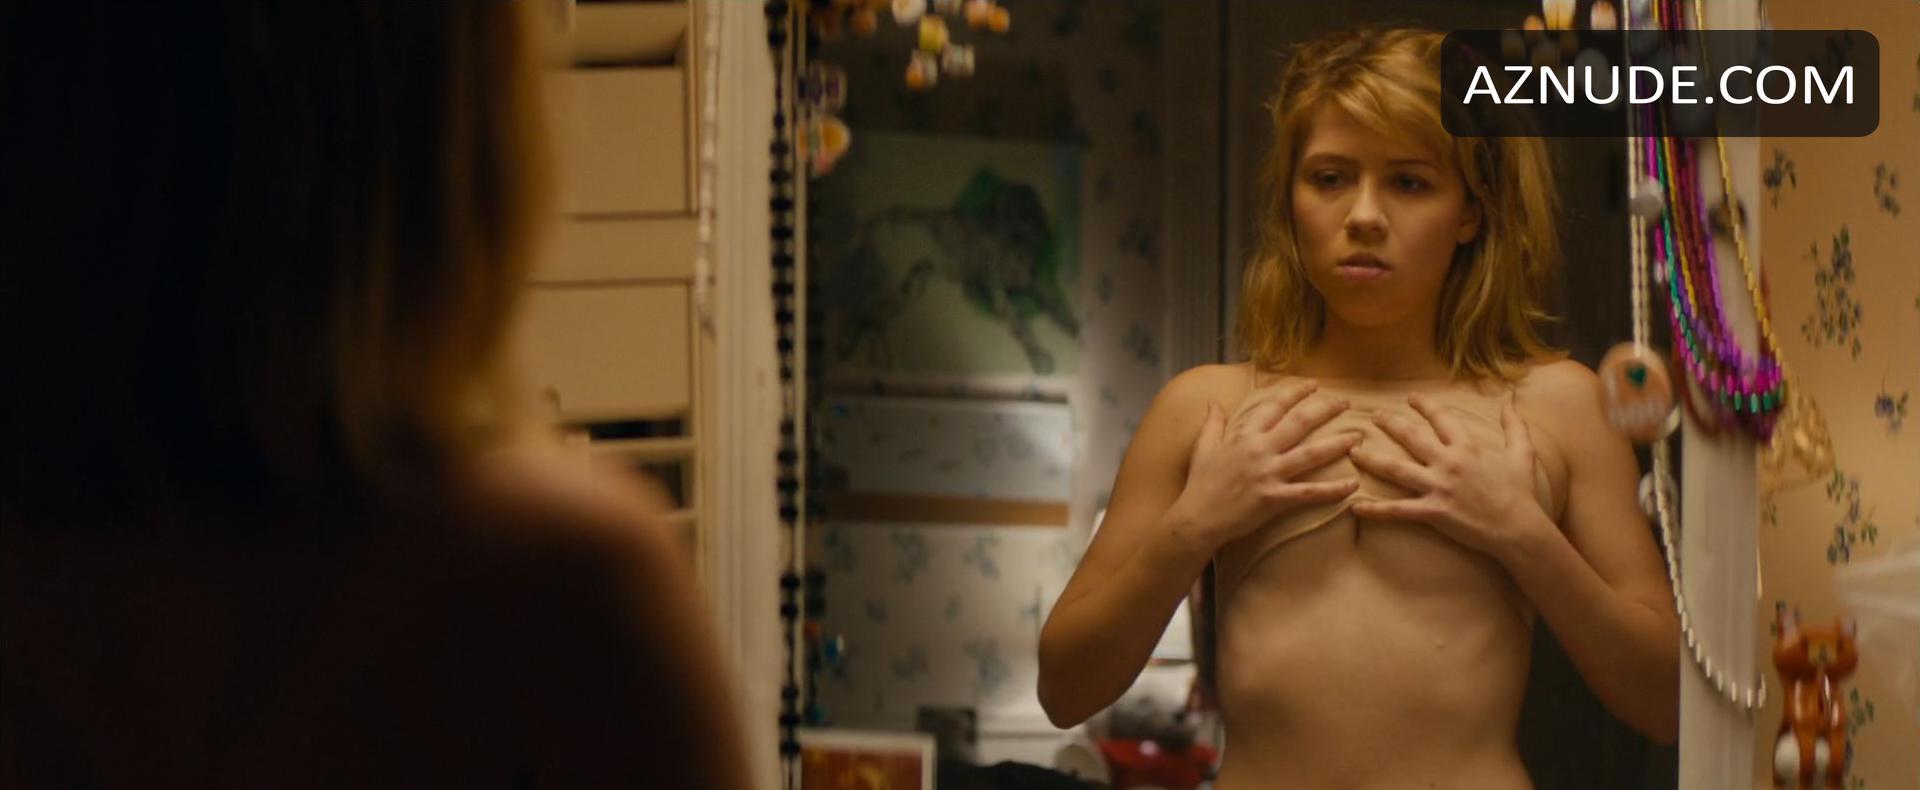 Jennette mccurdy nude sex scenes in movies